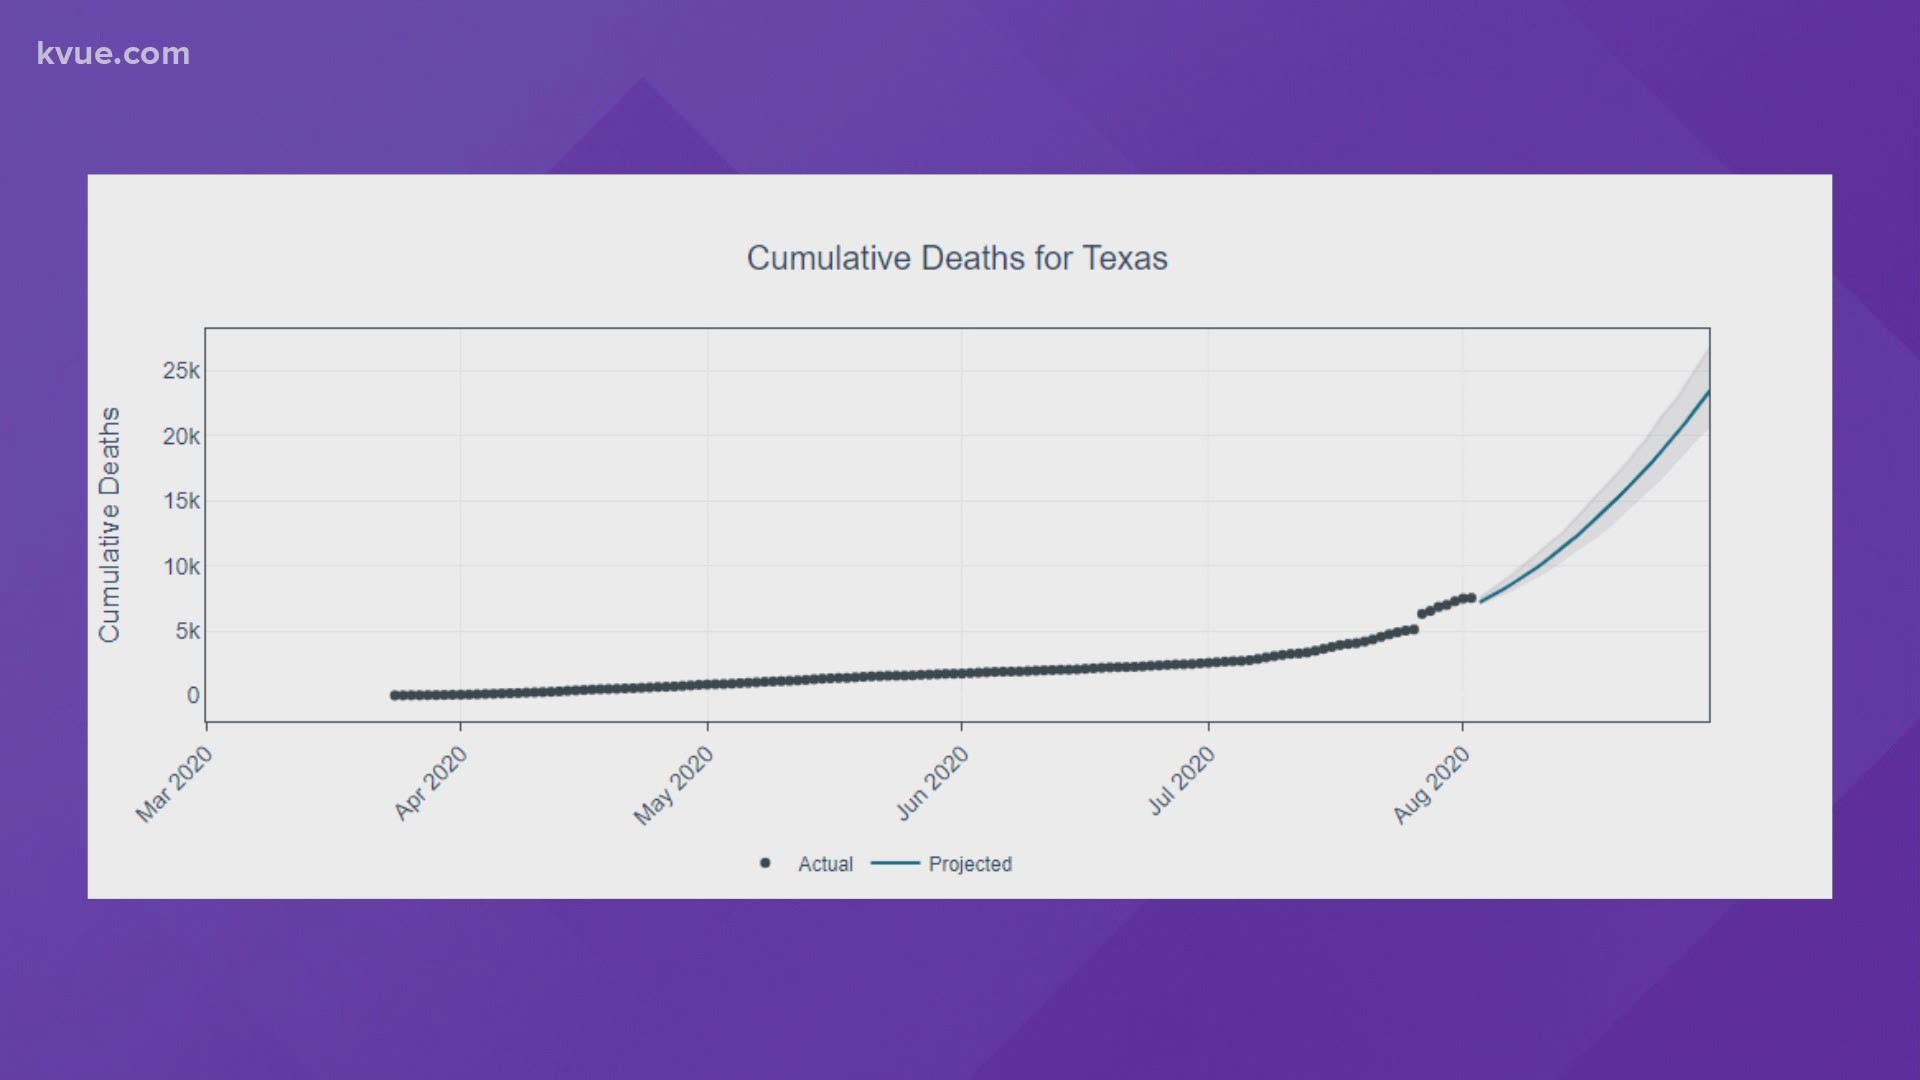 Researchers at UT are predicting a steep increase in deaths from COVID-19 across Texas by the end of August.